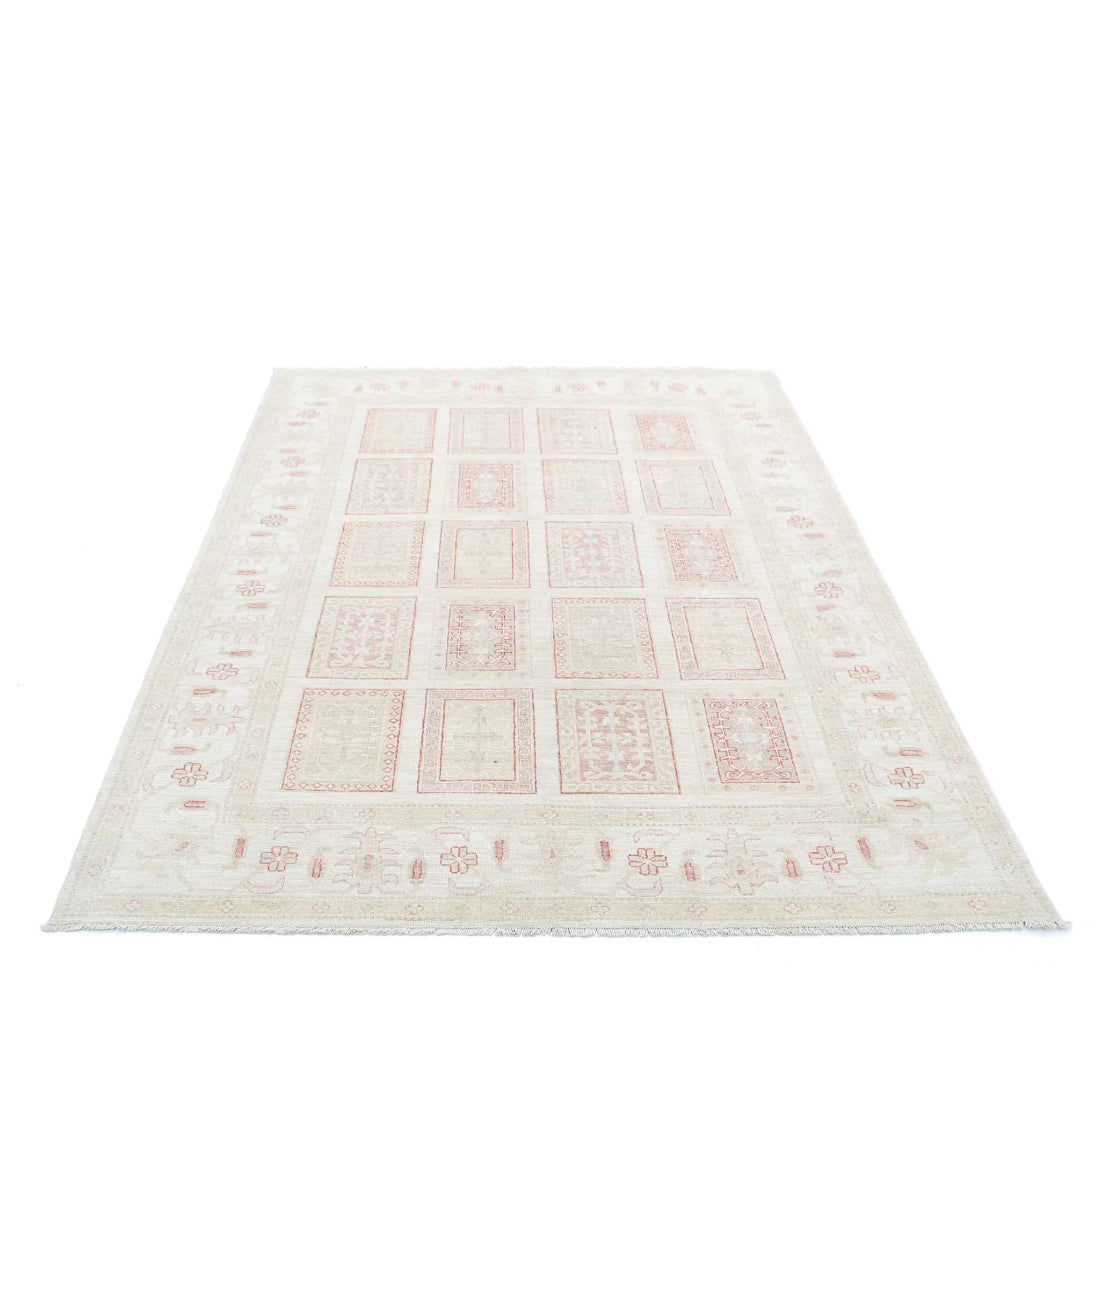 Hand Knotted Serenity Wool Rug - 5'6'' x 7'1'' 5'6'' x 7'1'' (165 X 213) / Ivory / Grey